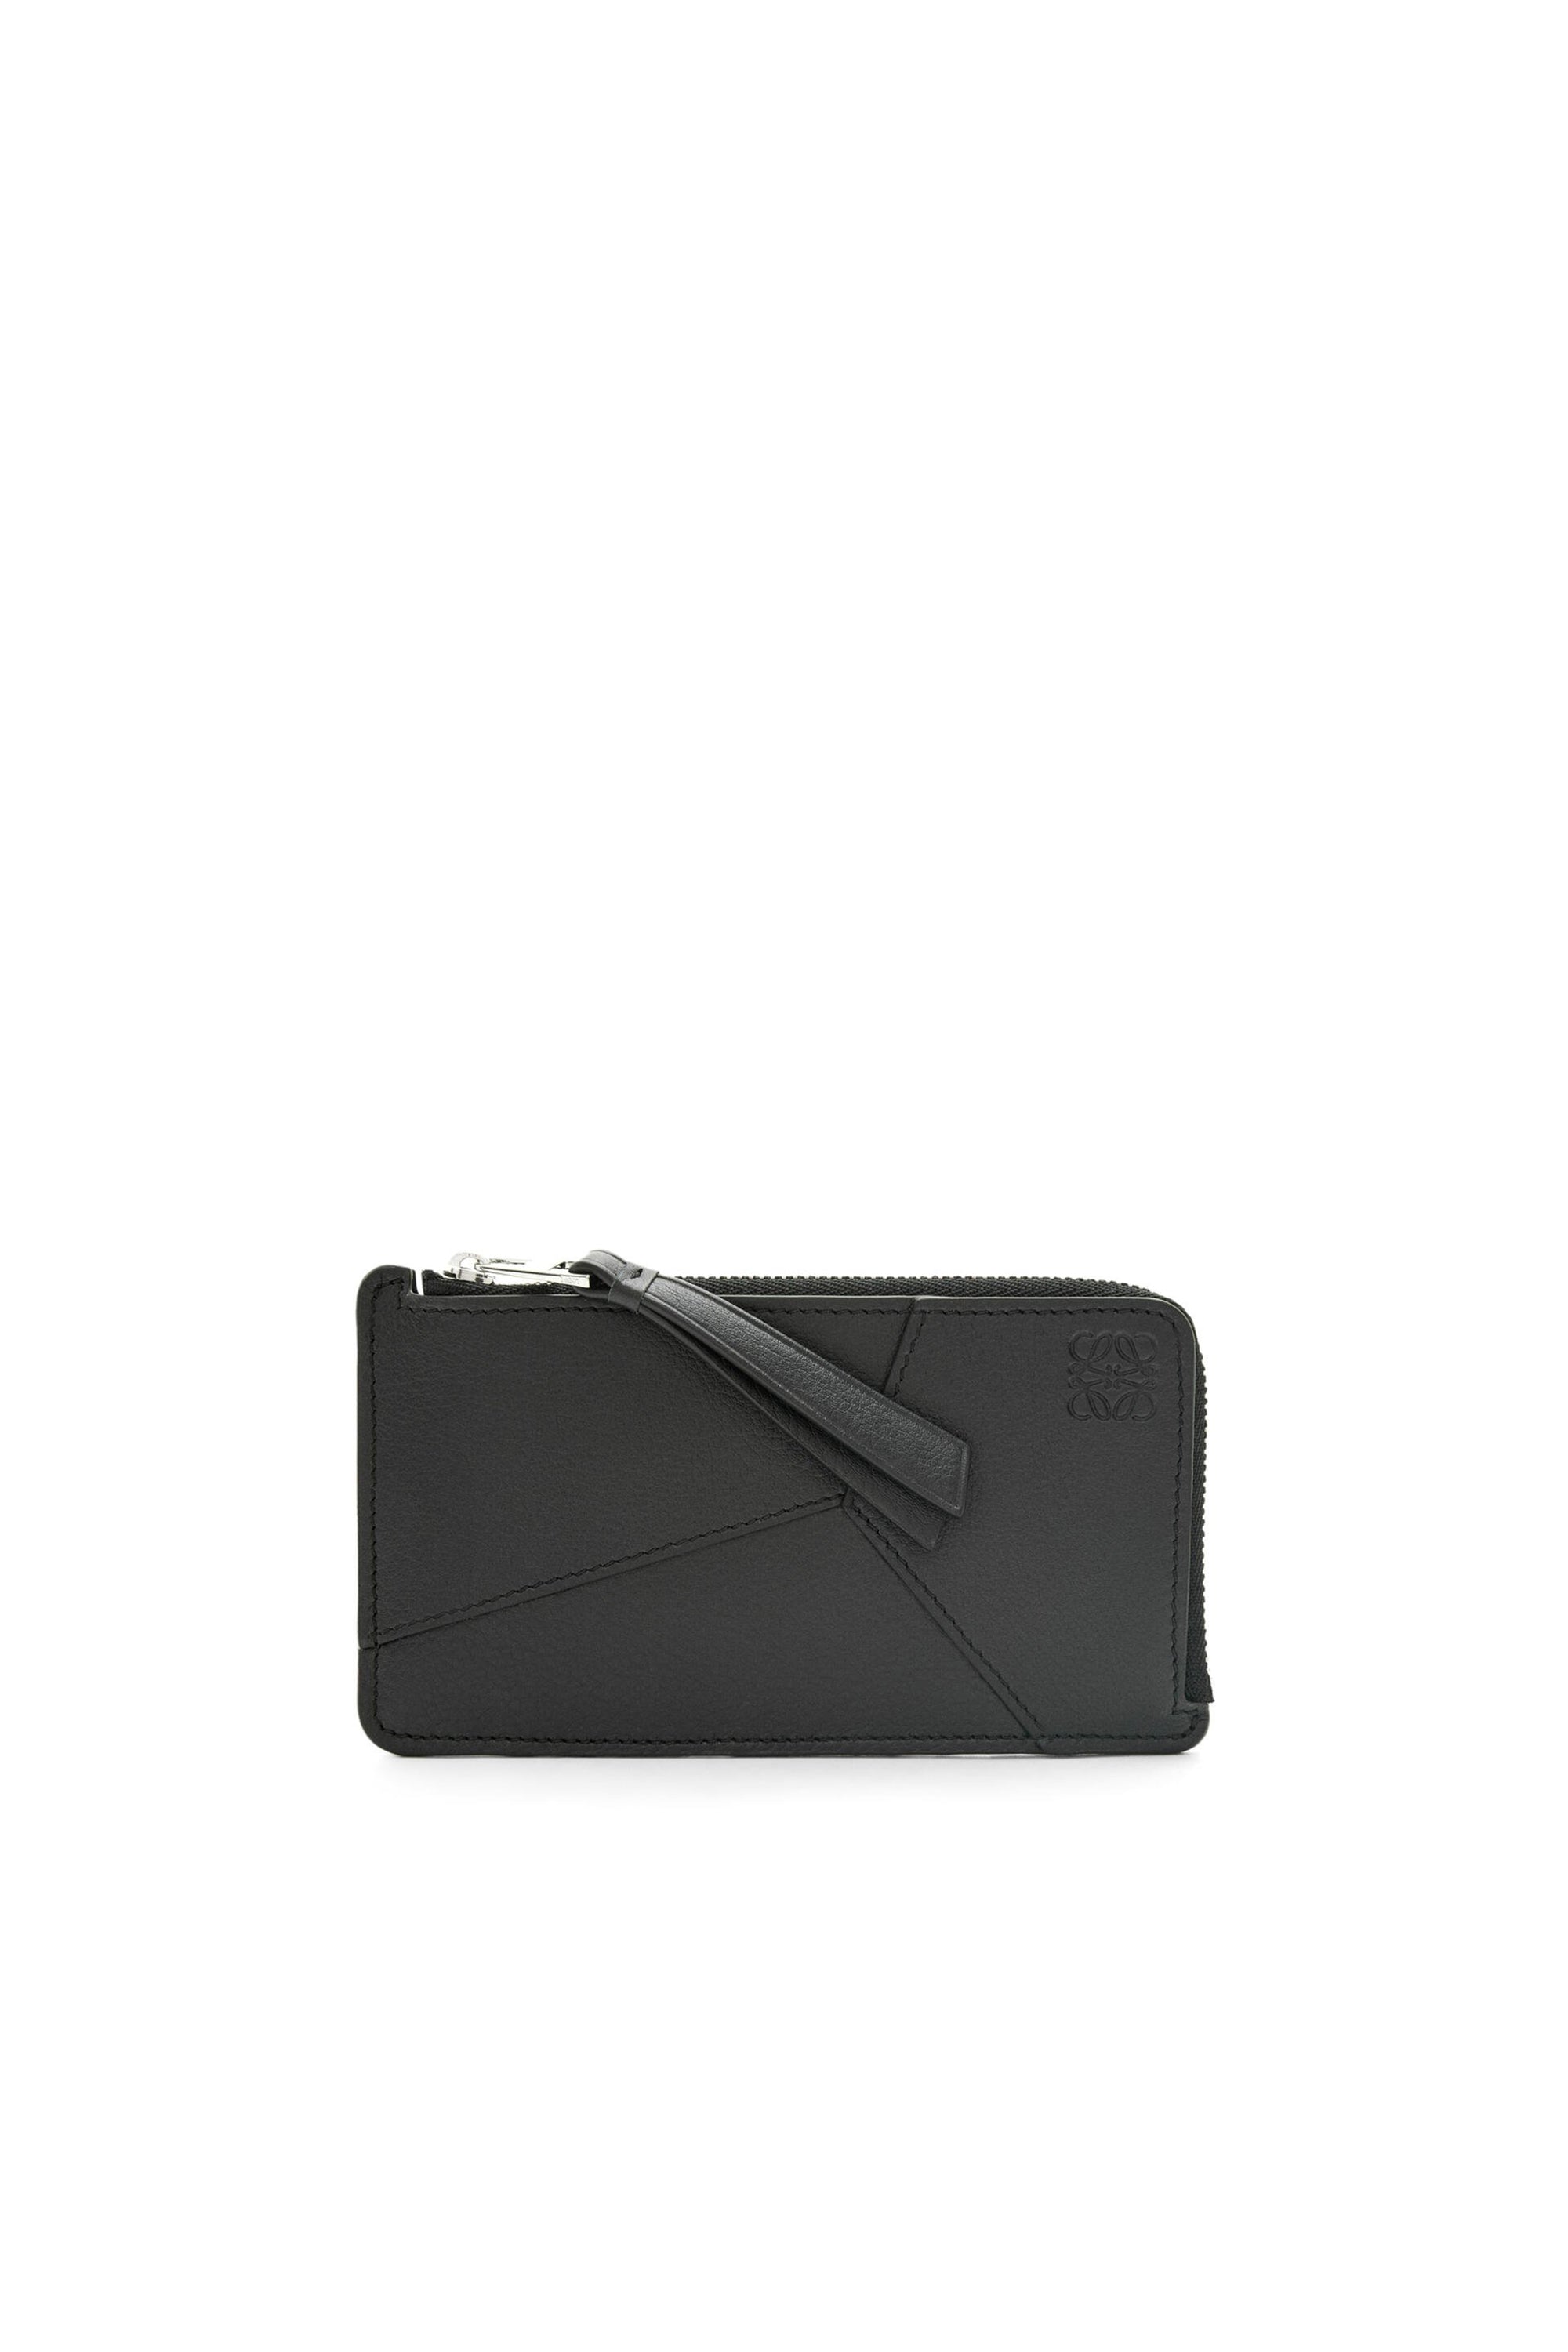 PUZZLE LEATHER COIN CARDHOLDER for Women - Loewe